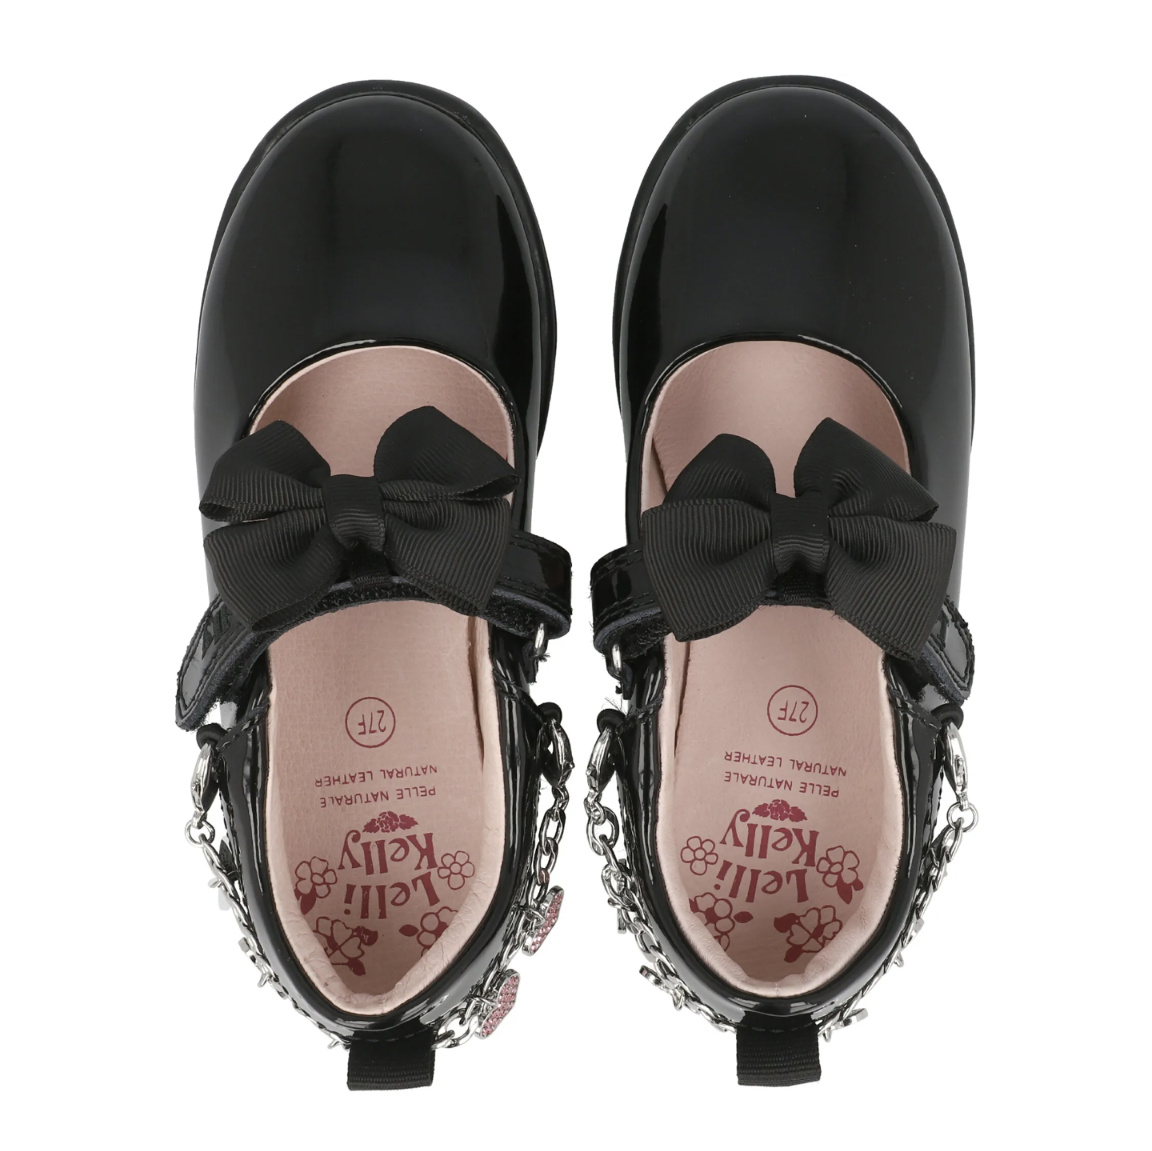 A girls Mary Jane school shoe by Lelli Kelly, style LK8224 Angel, in black patent leather with velcro fastening and detachable fabric bow and bracelet. View from above.